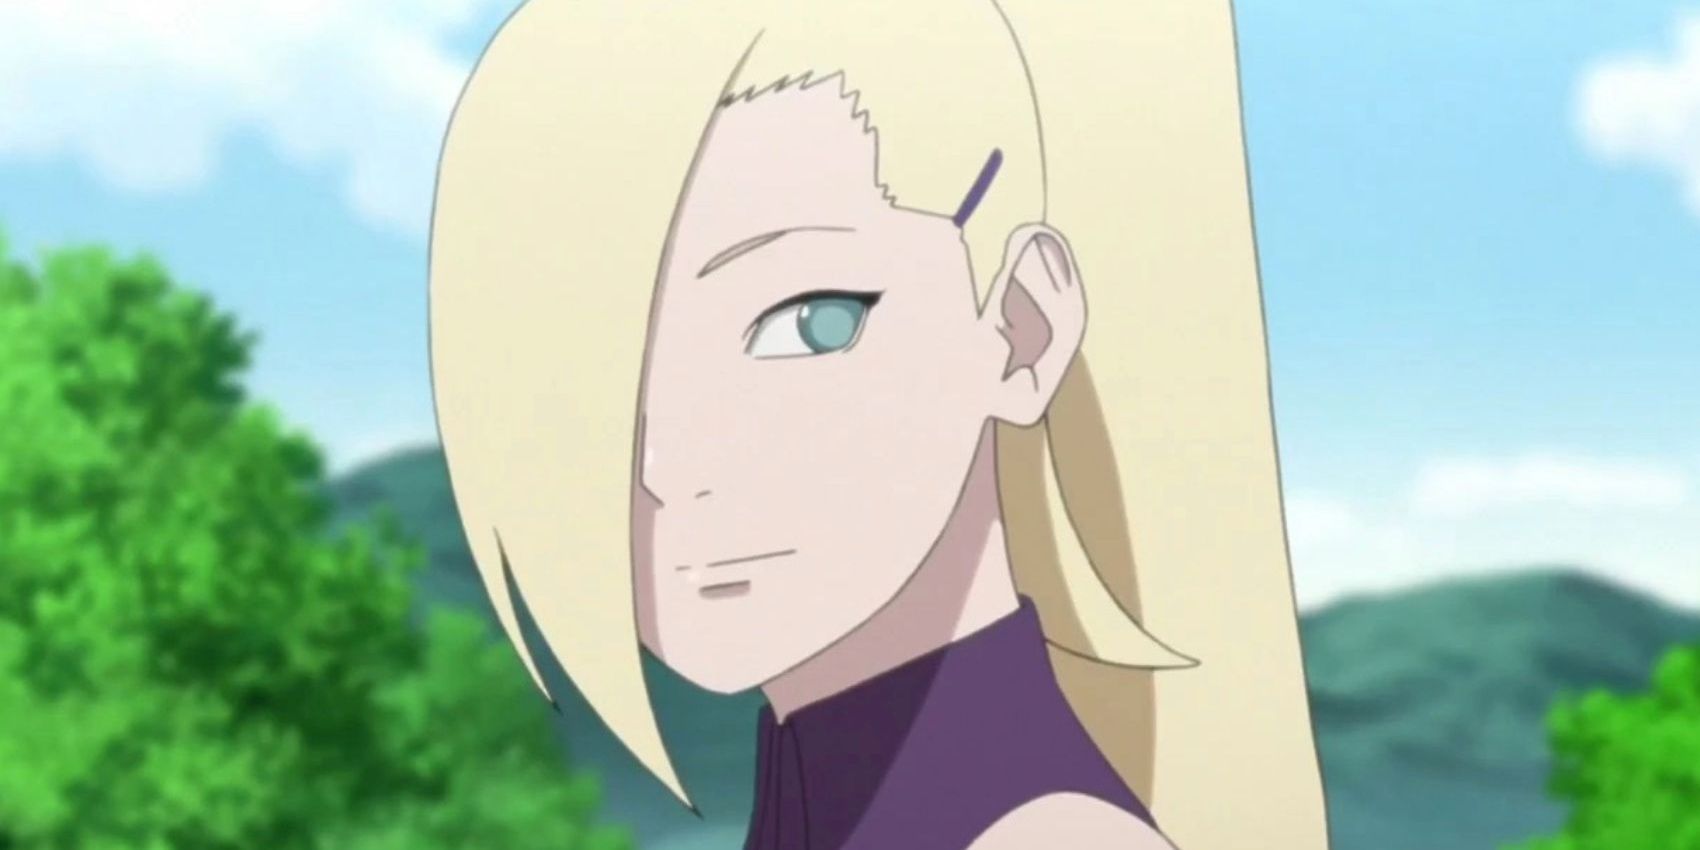 Ino Yamanaka is looking over her shoulder in Naruto.